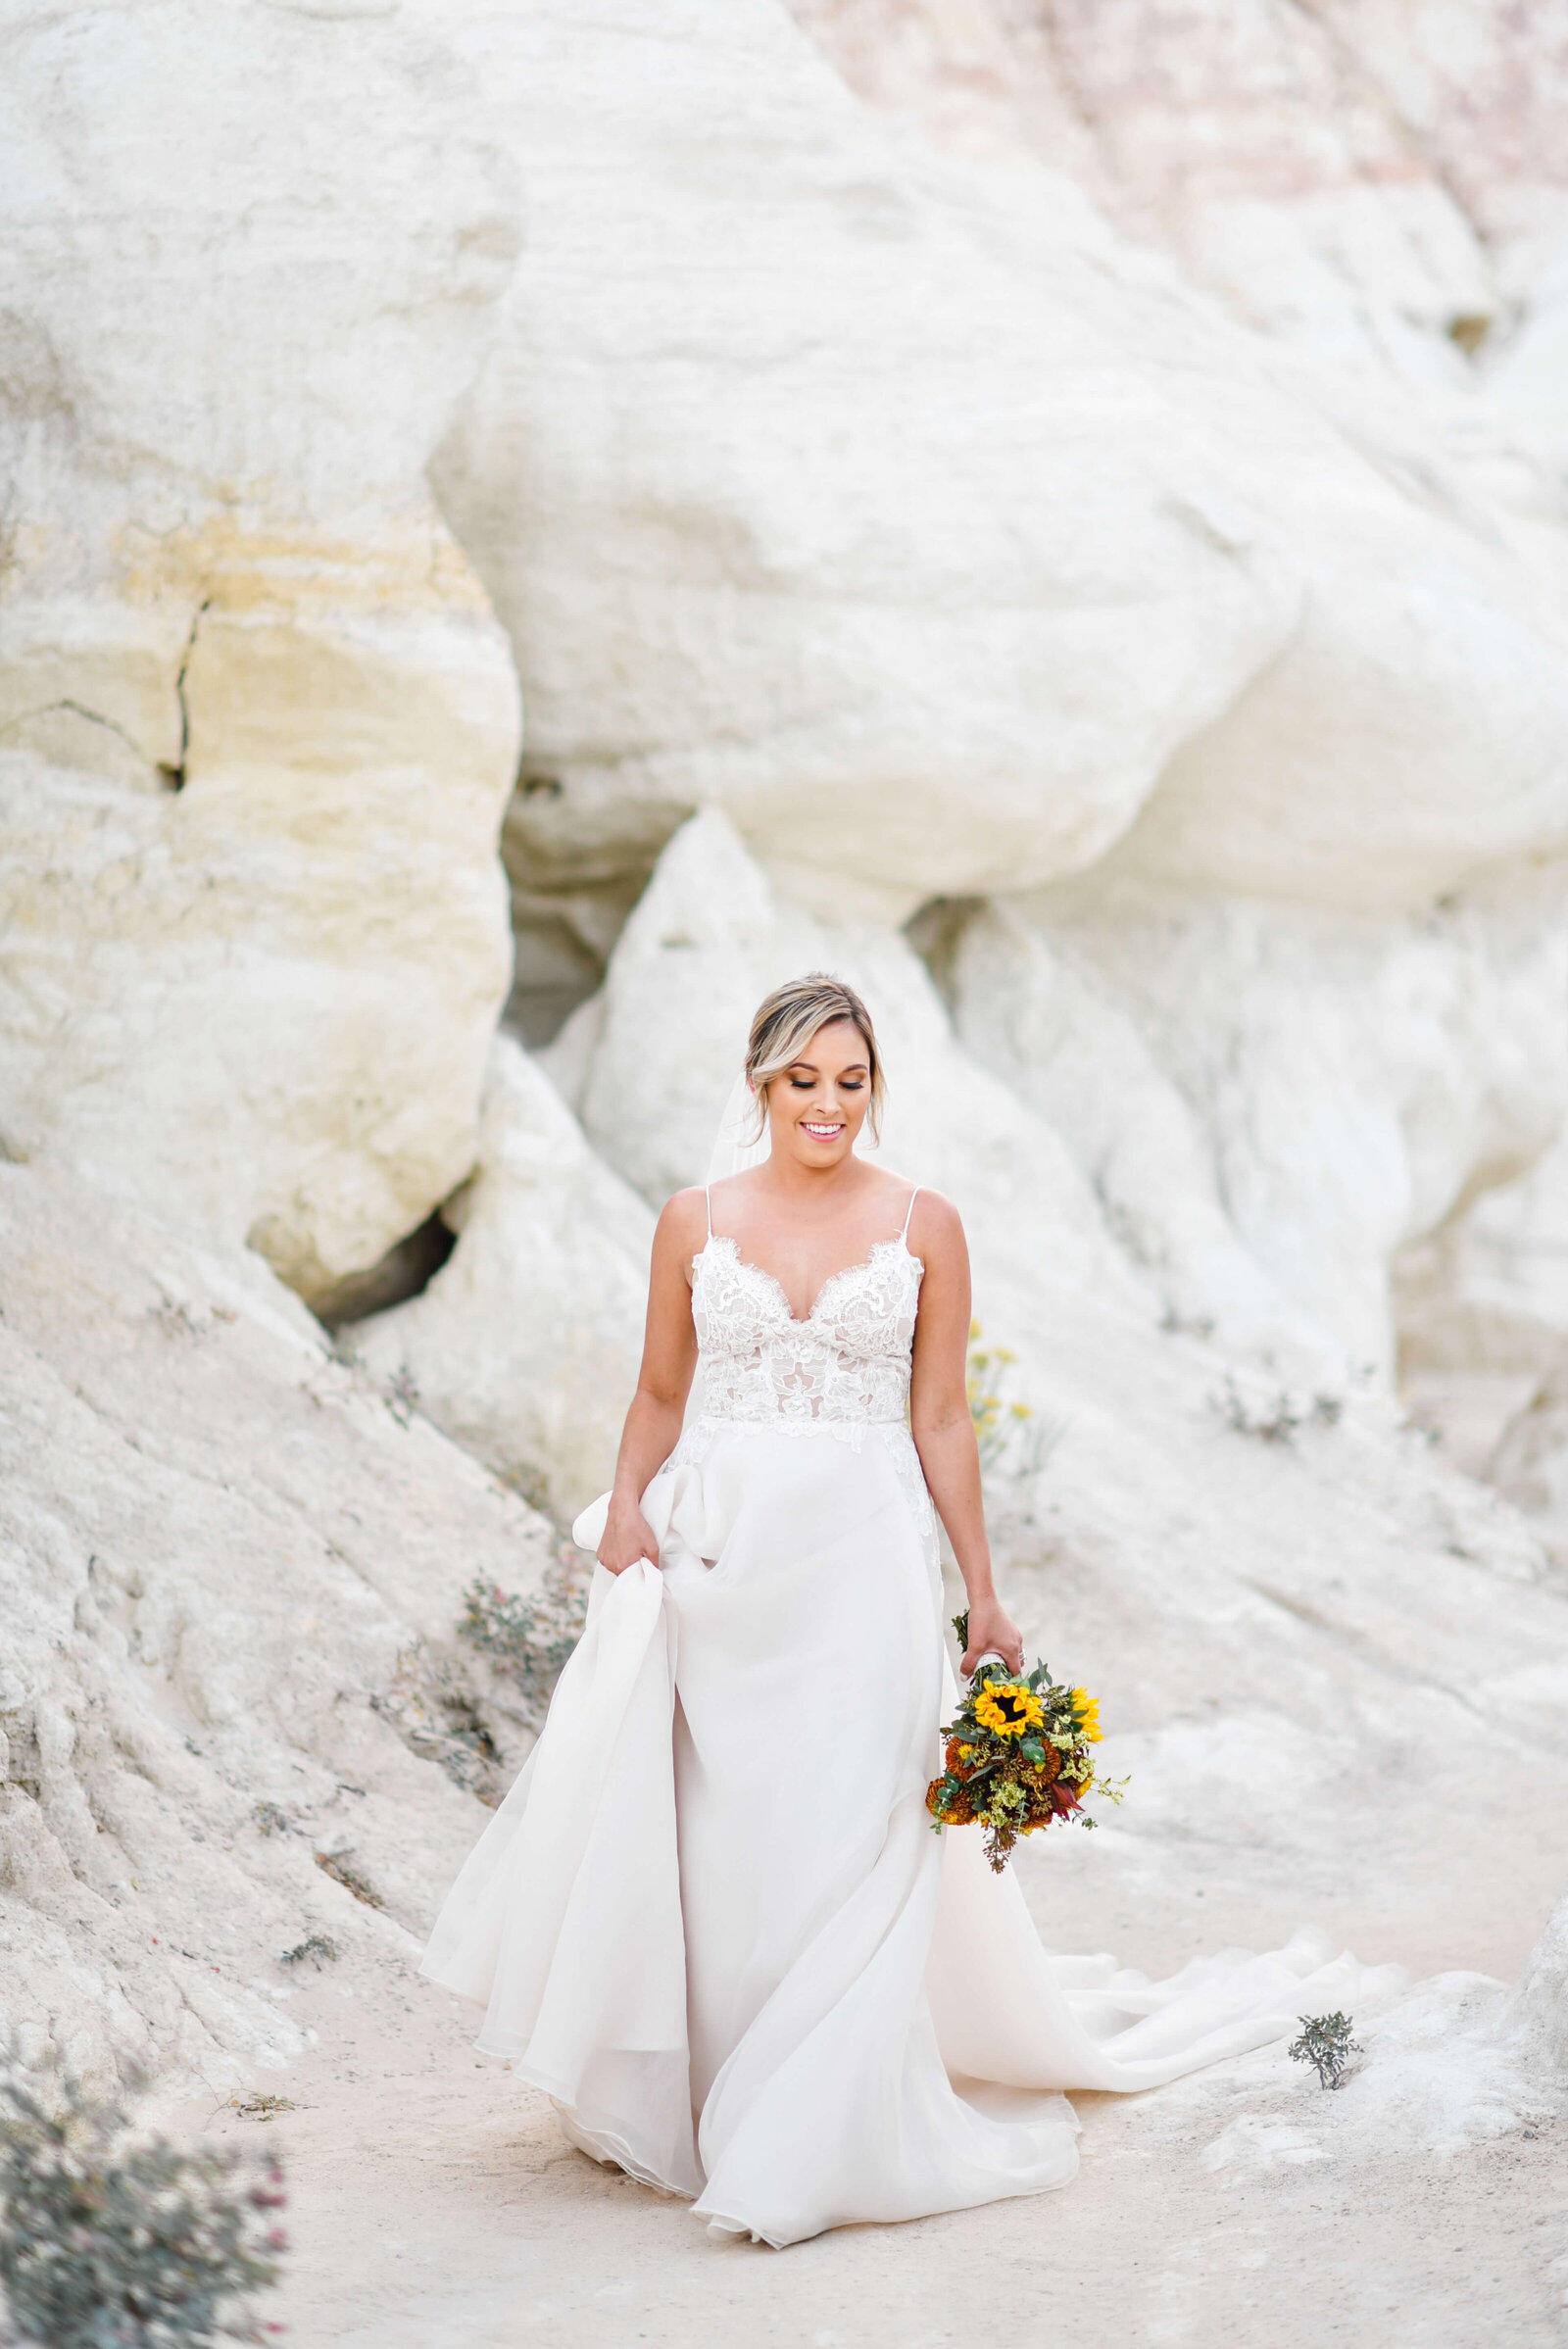 Lovely bride holds up her dress and walks along a sandy area in an image taken by Virginia wedding photographer Erin Winter